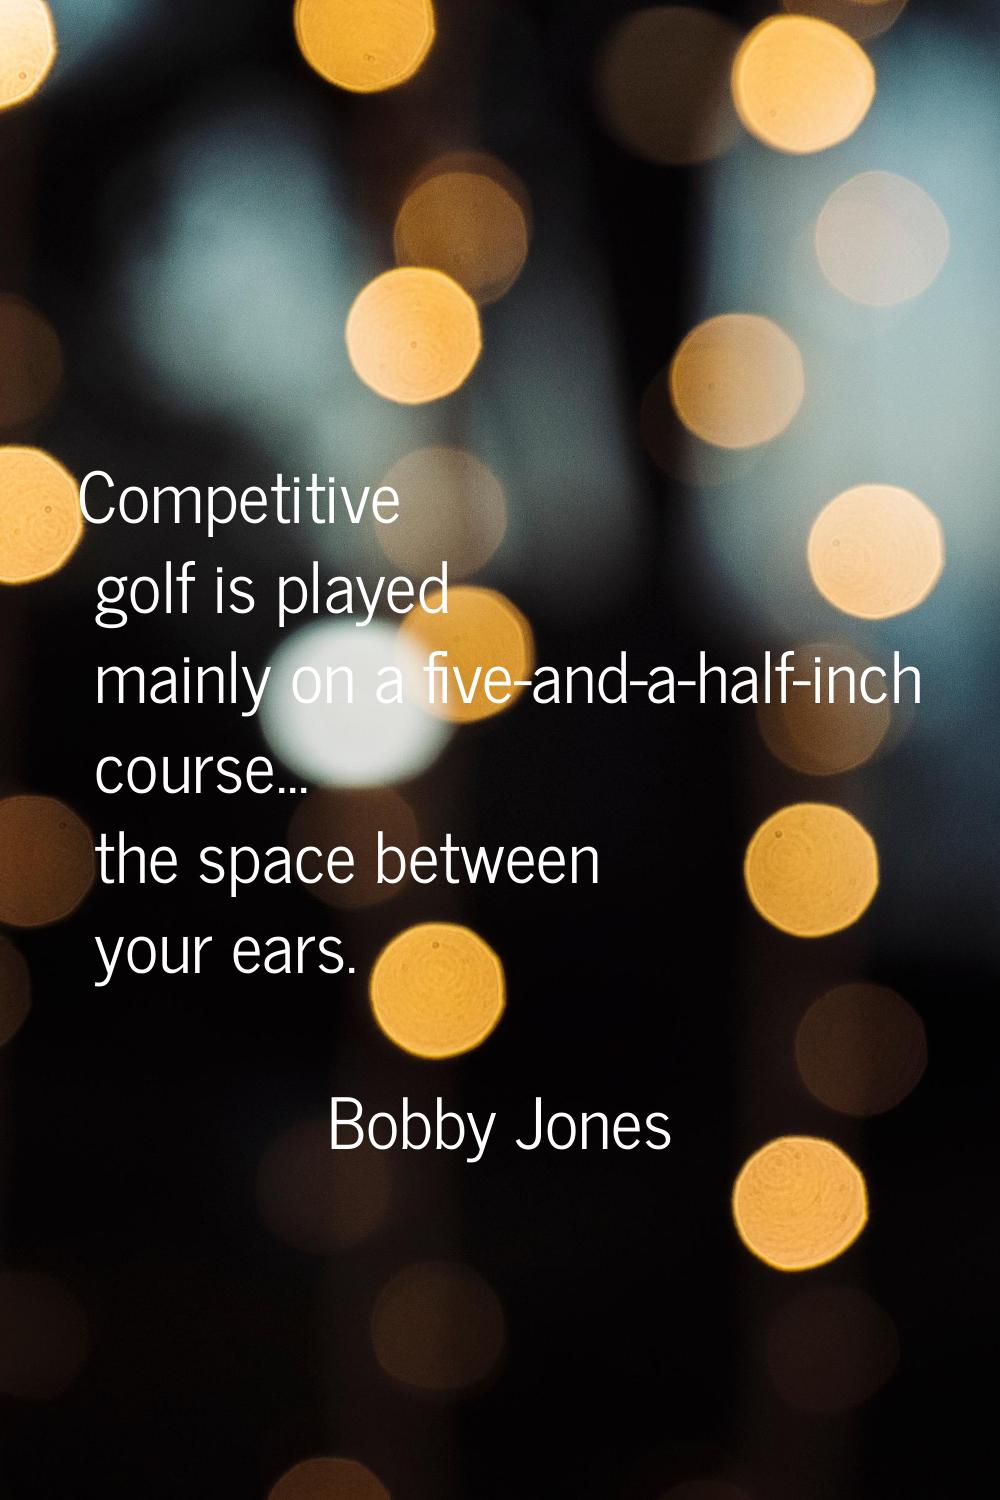 Competitive golf is played mainly on a five-and-a-half-inch course... the space between your ears.